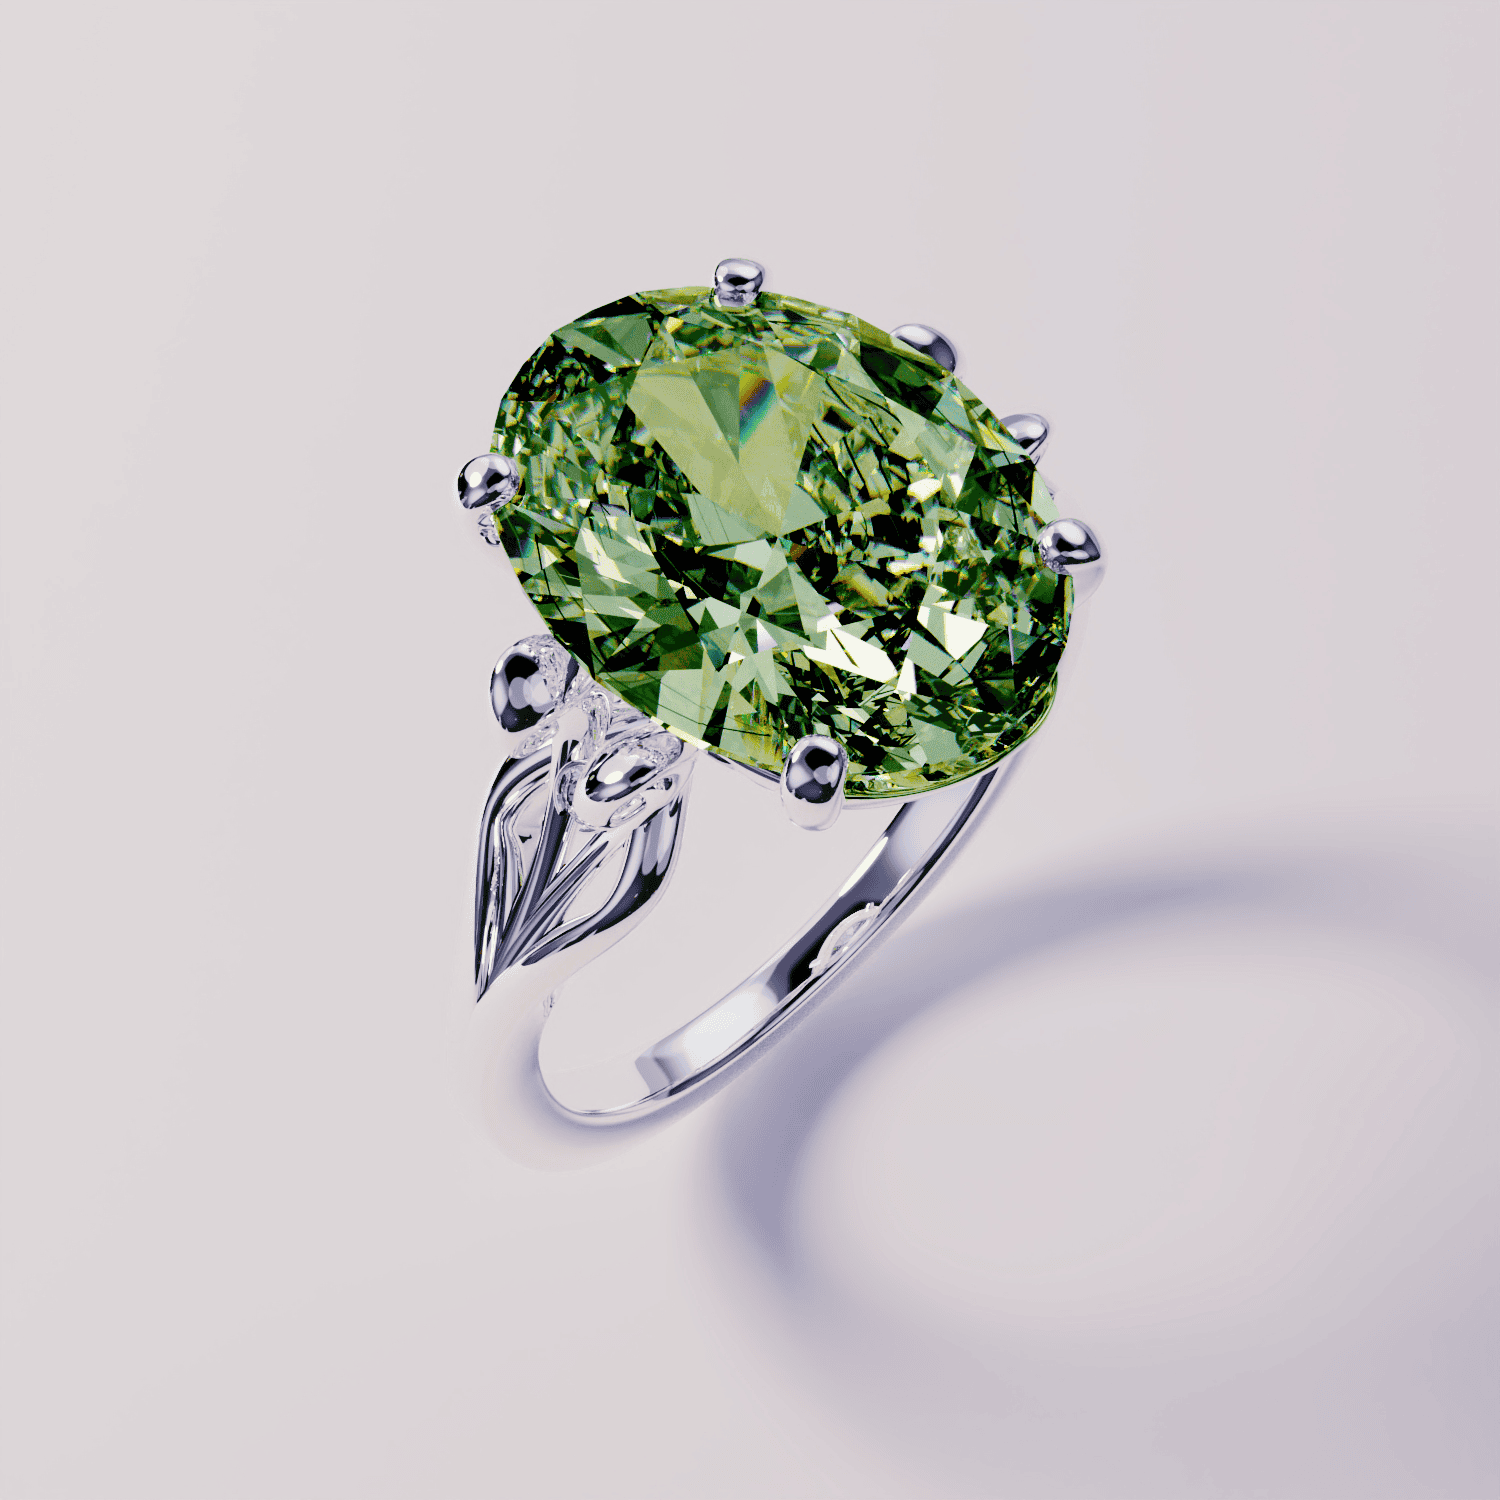 August Peridot Birthstone Ring - S925 Sterling Silver